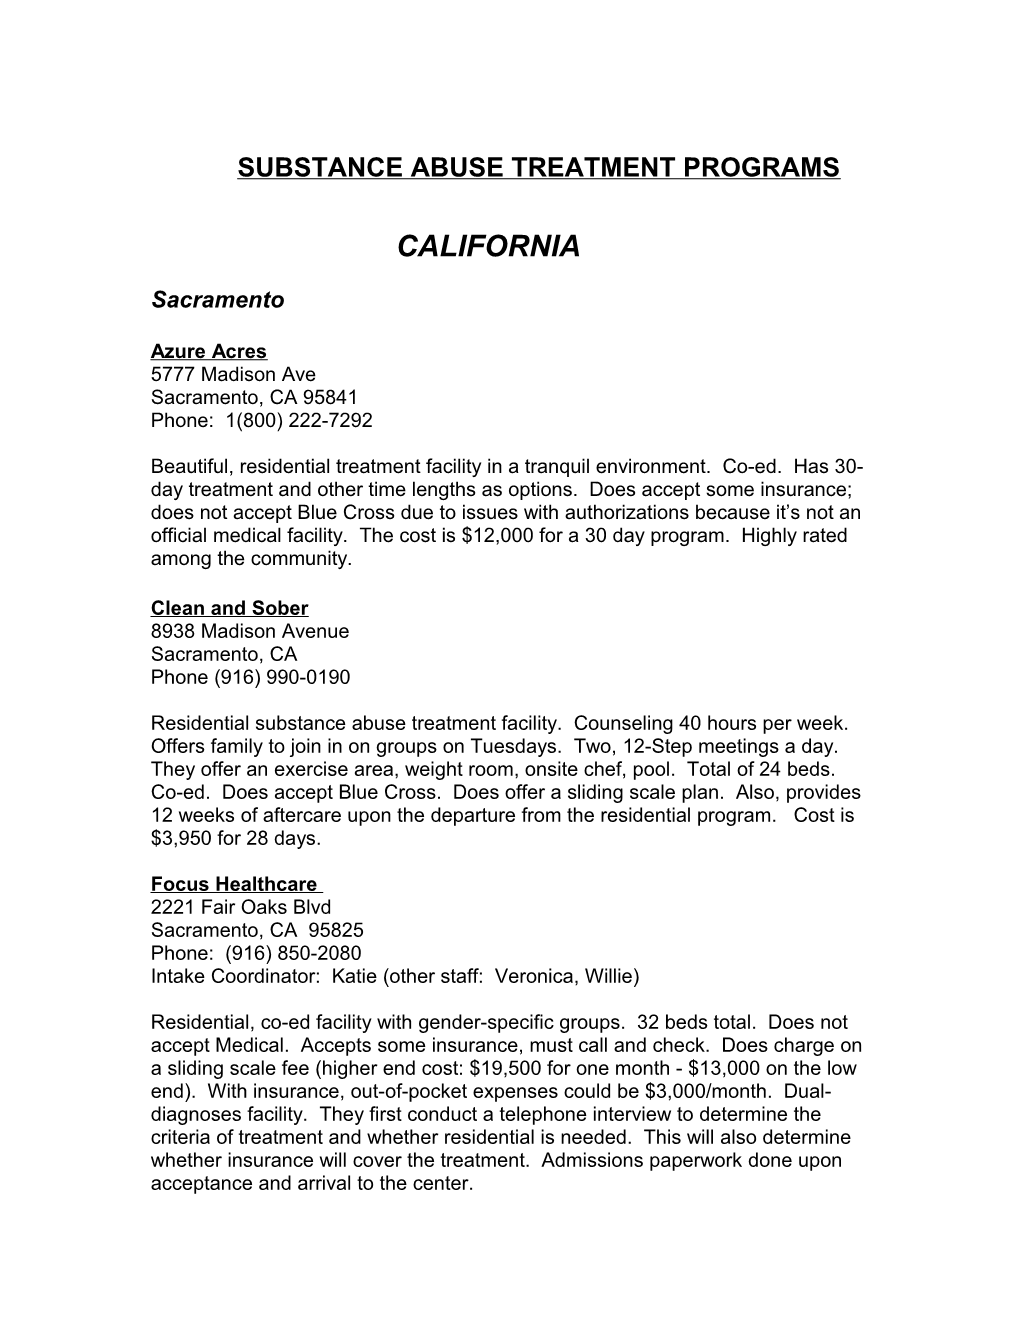 Substance Abuse Treatment Options s1